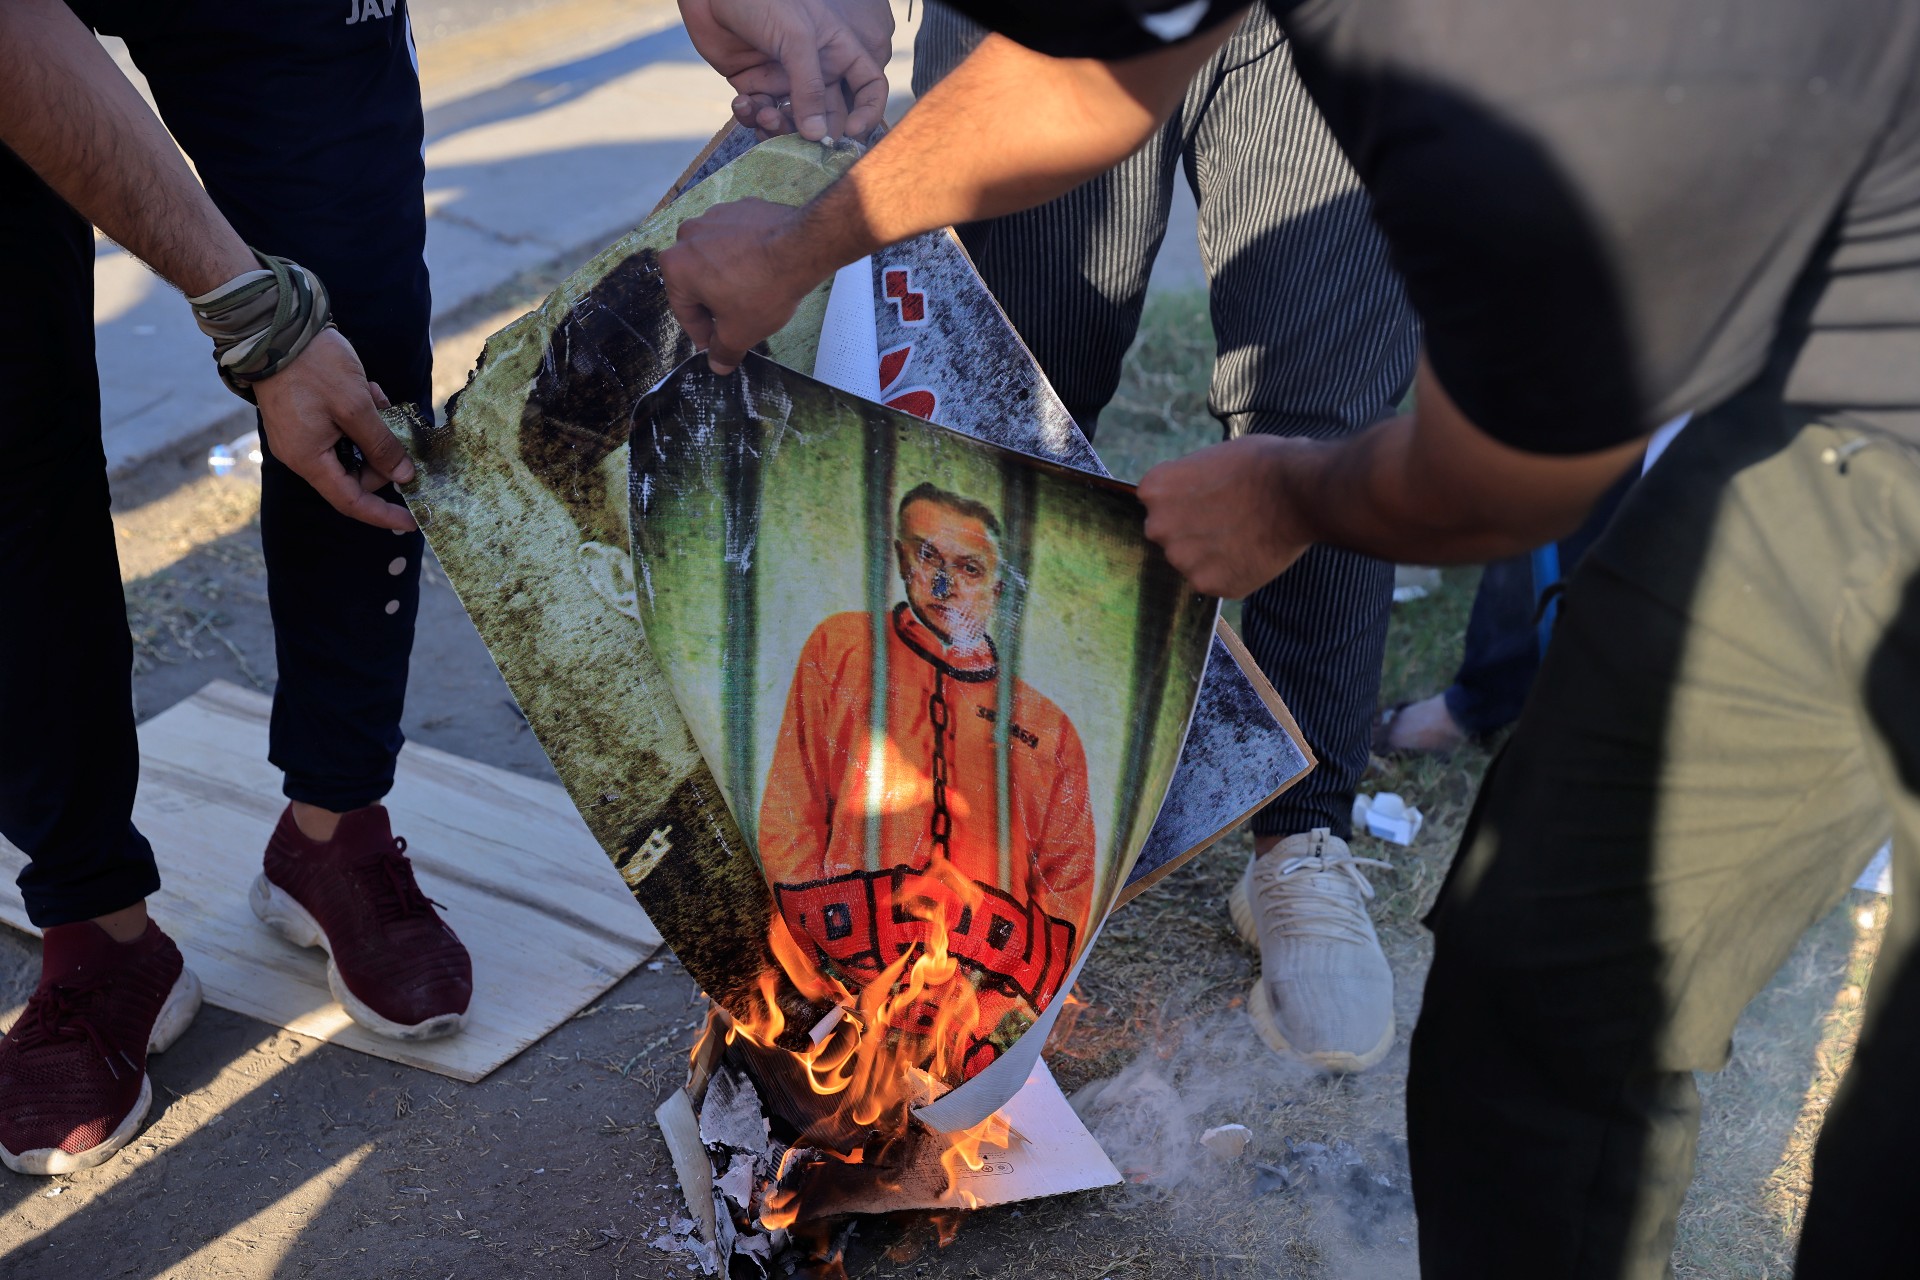 Supporters of Shia armed groups burn portraits of Prime Minister Mustafa al-Kadhemi and Iraq security officials during a protest against the election results 6 November (Reuters)